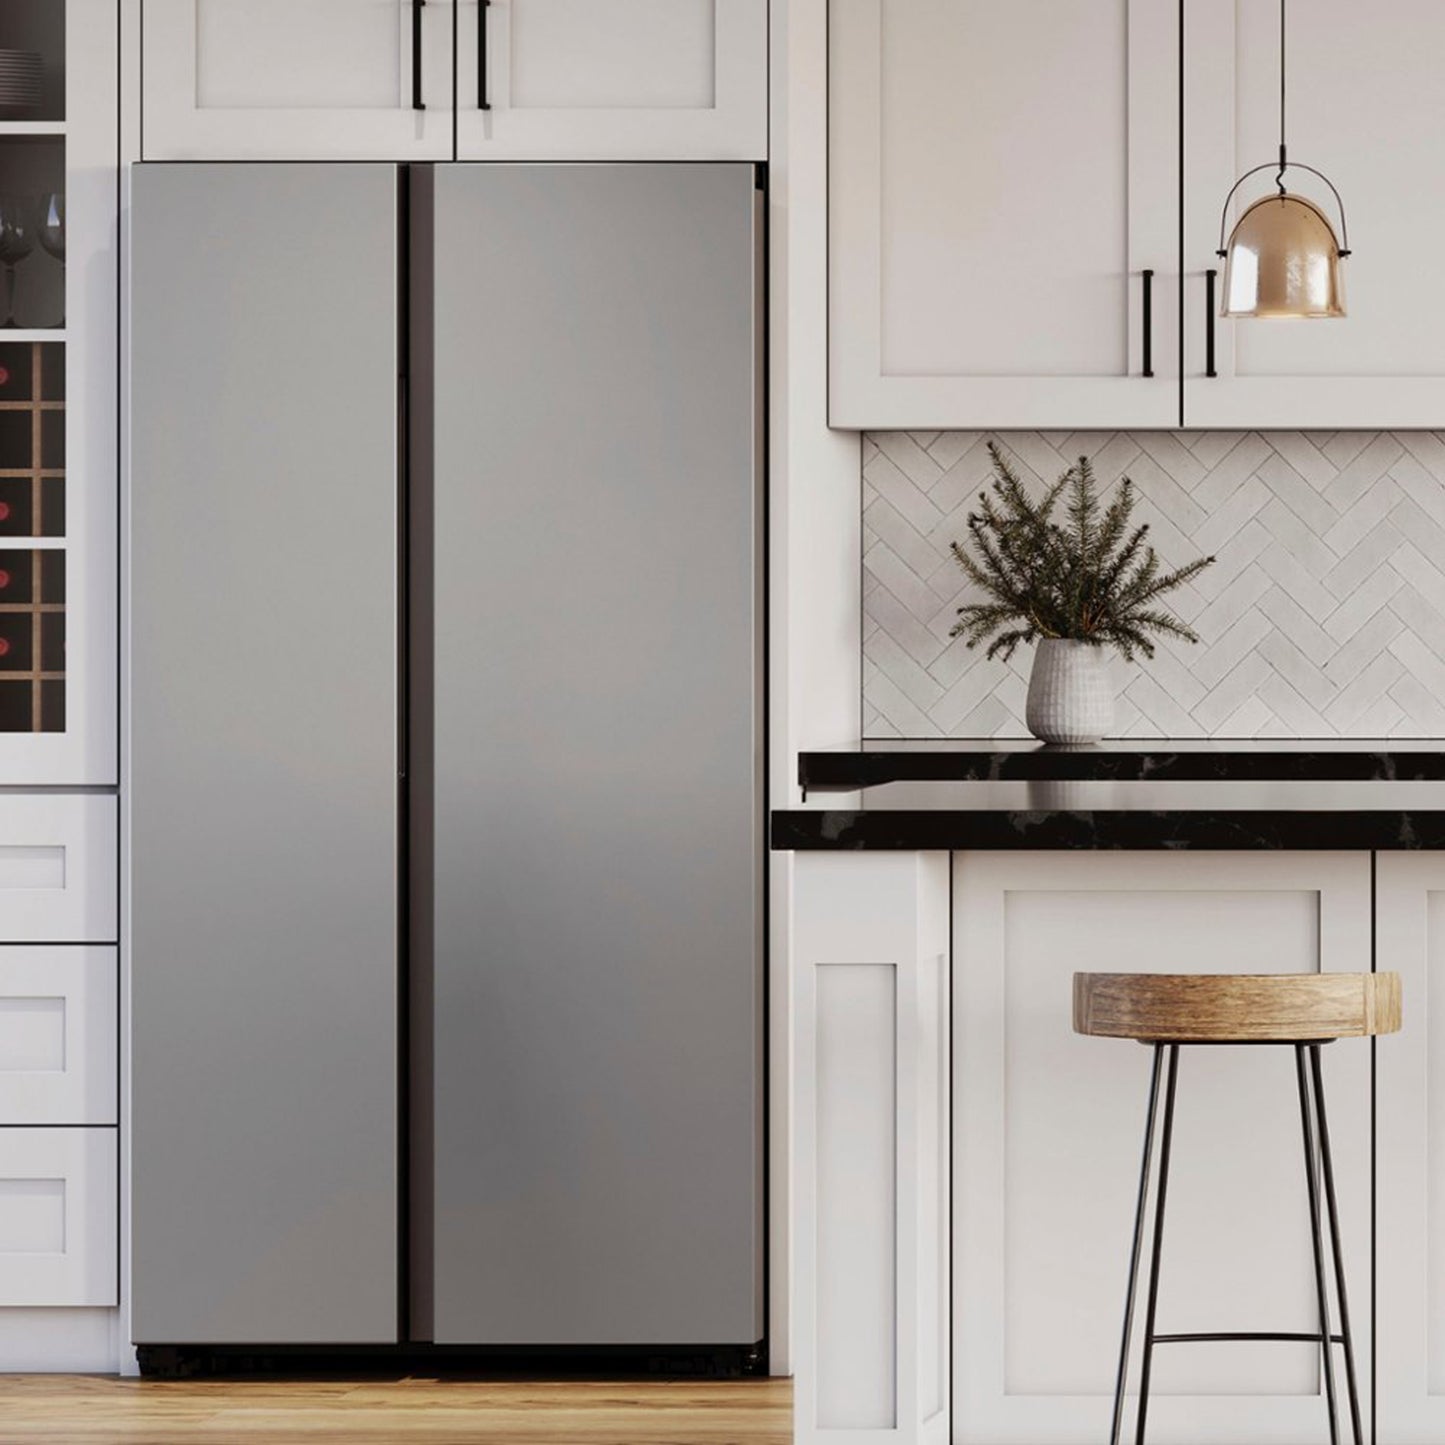 Bespoke Counter Depth Side-by-Side 23 cu. ft. Refrigerator with Beverage Center™ in Stainless Steel.